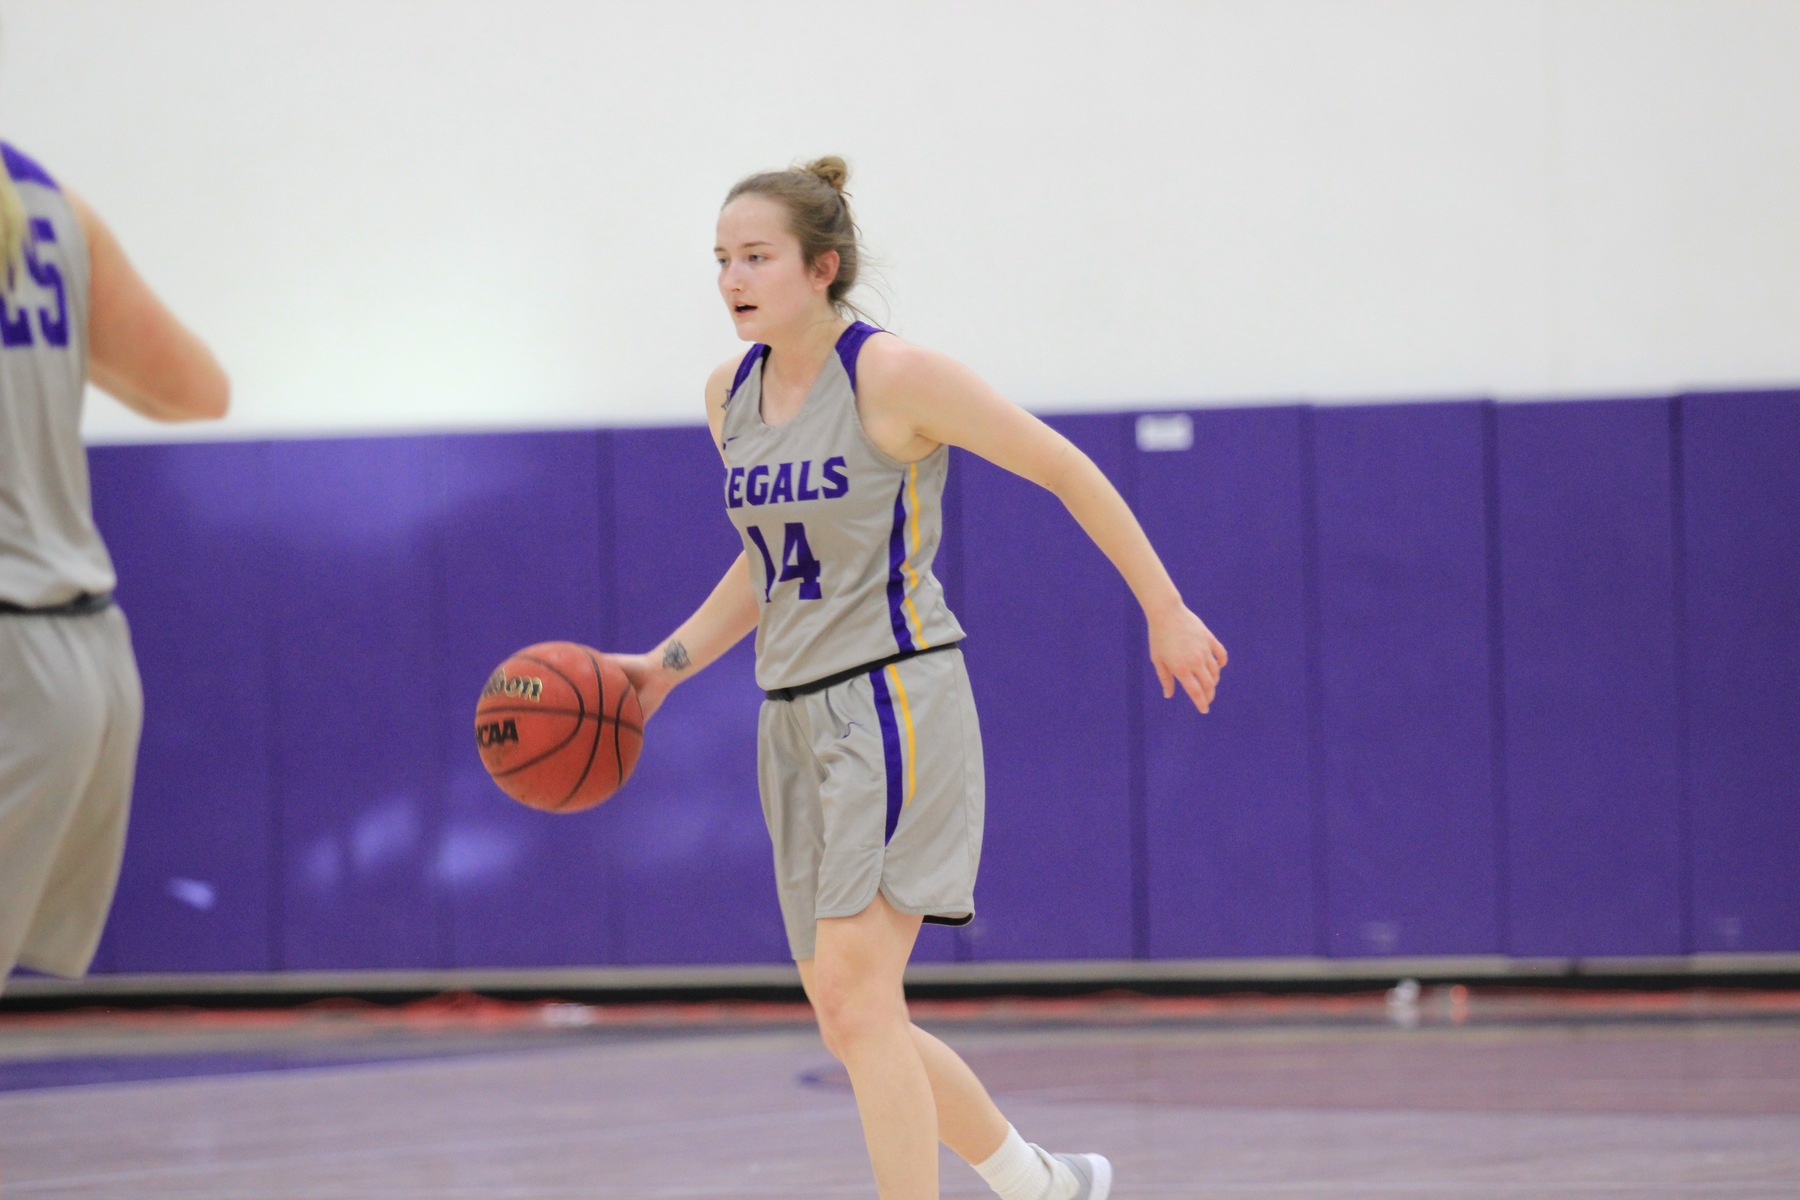 Natalie Ruhl led the Regals with 16 points on the night. (Photo Credit: Gabby Flores)